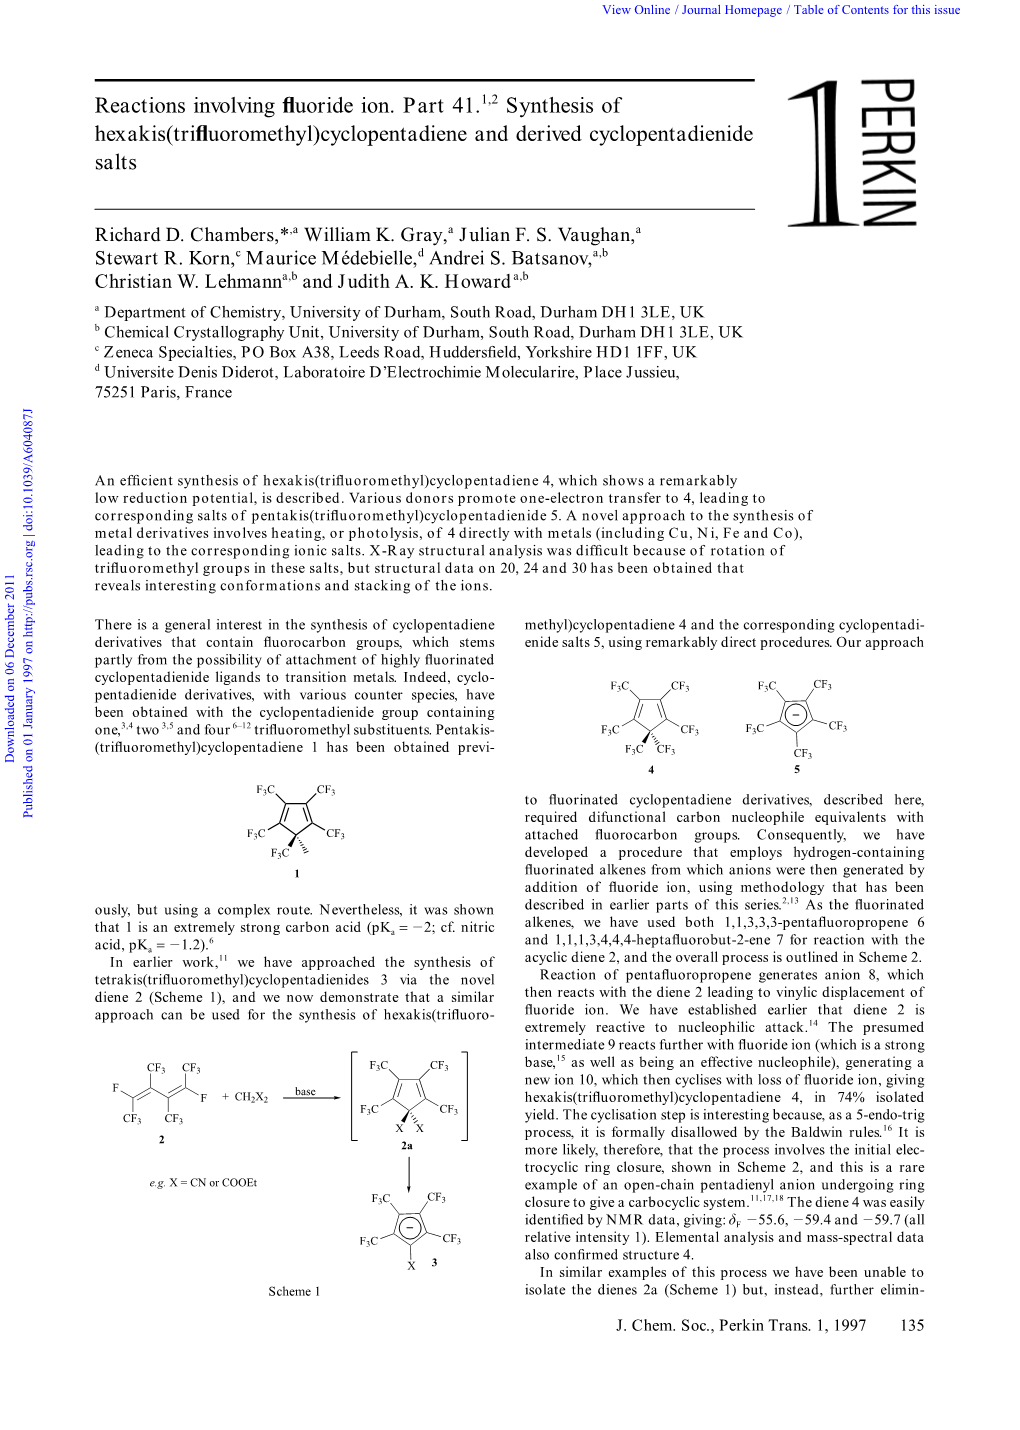 Reactions Involving Fluoride Ion. Part 41.1,2 Synthesis of Hexakis